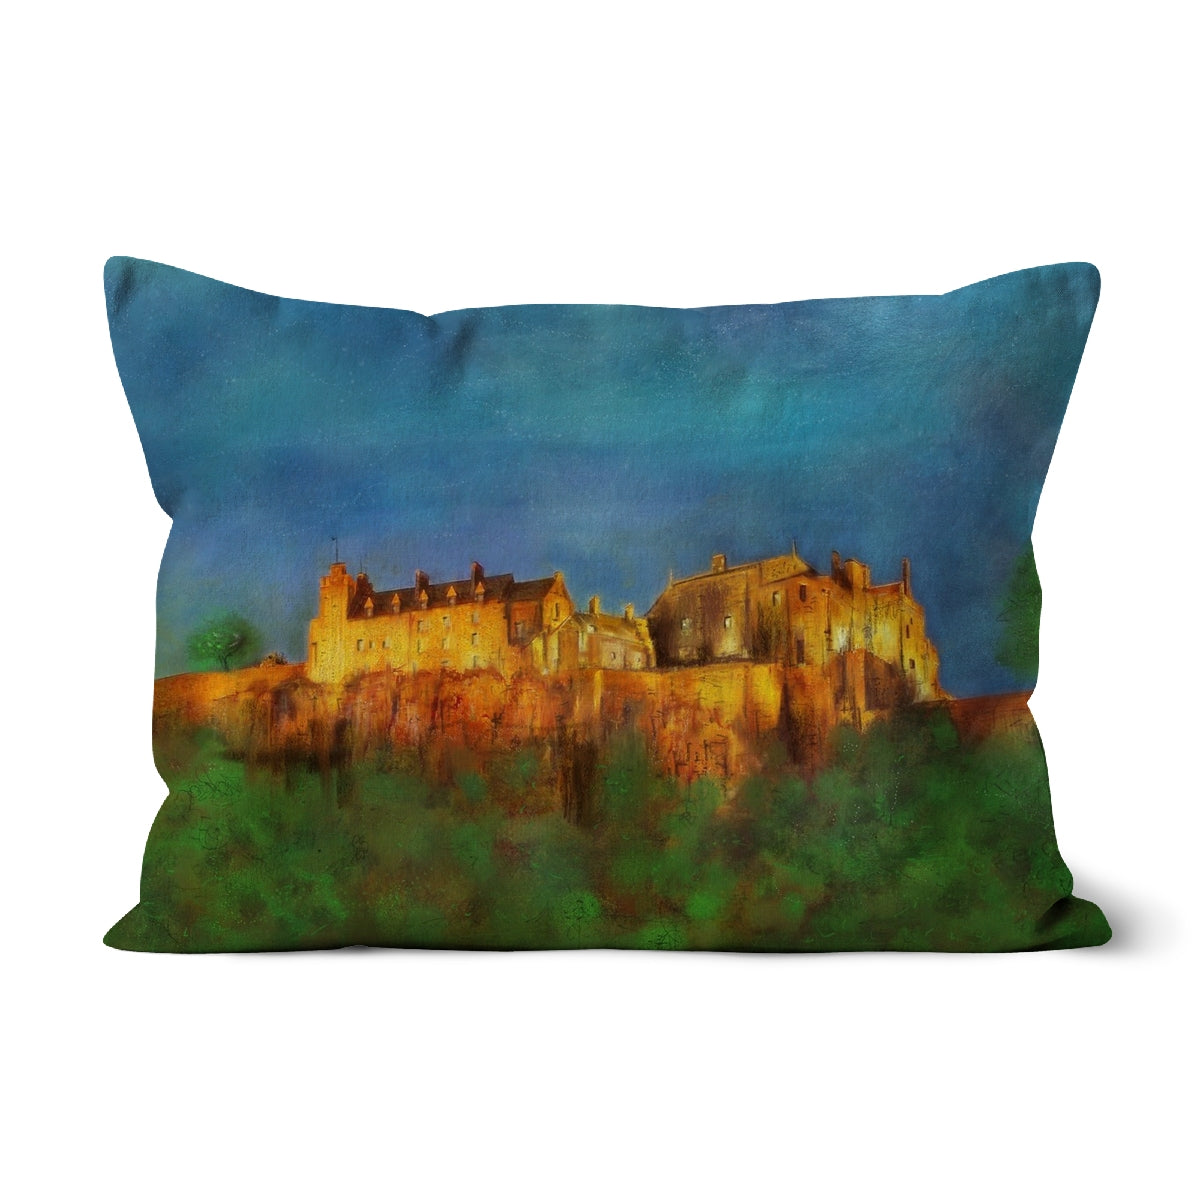 Stirling Castle Art Gifts Cushion-Cushions-Historic & Iconic Scotland Art Gallery-Linen-19"x13"-Paintings, Prints, Homeware, Art Gifts From Scotland By Scottish Artist Kevin Hunter